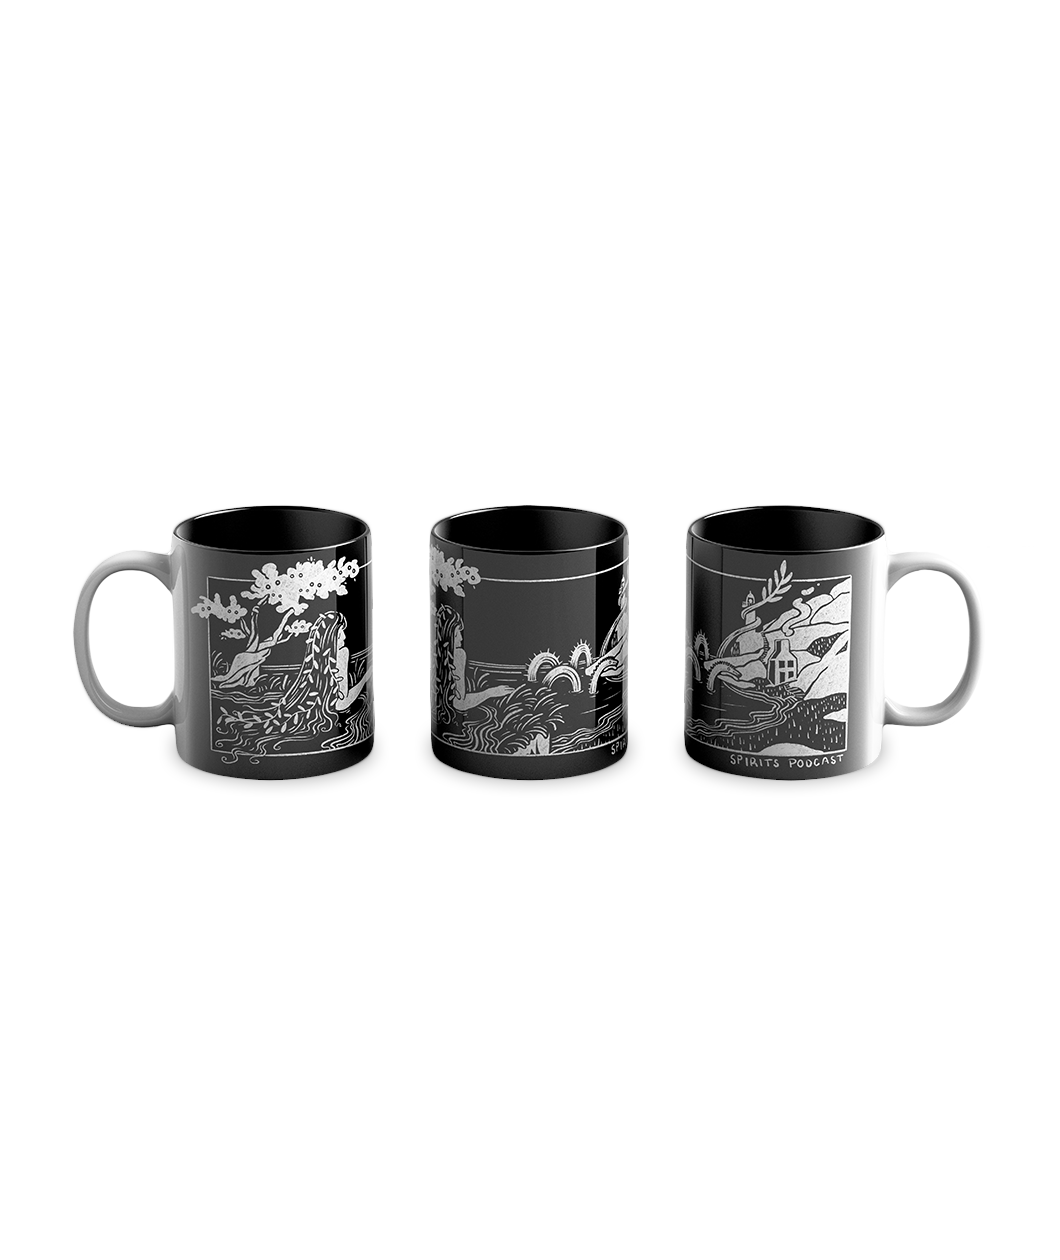 A line of three black and white mugs showing an illustration of a mermaid in the water. From Spirits. 